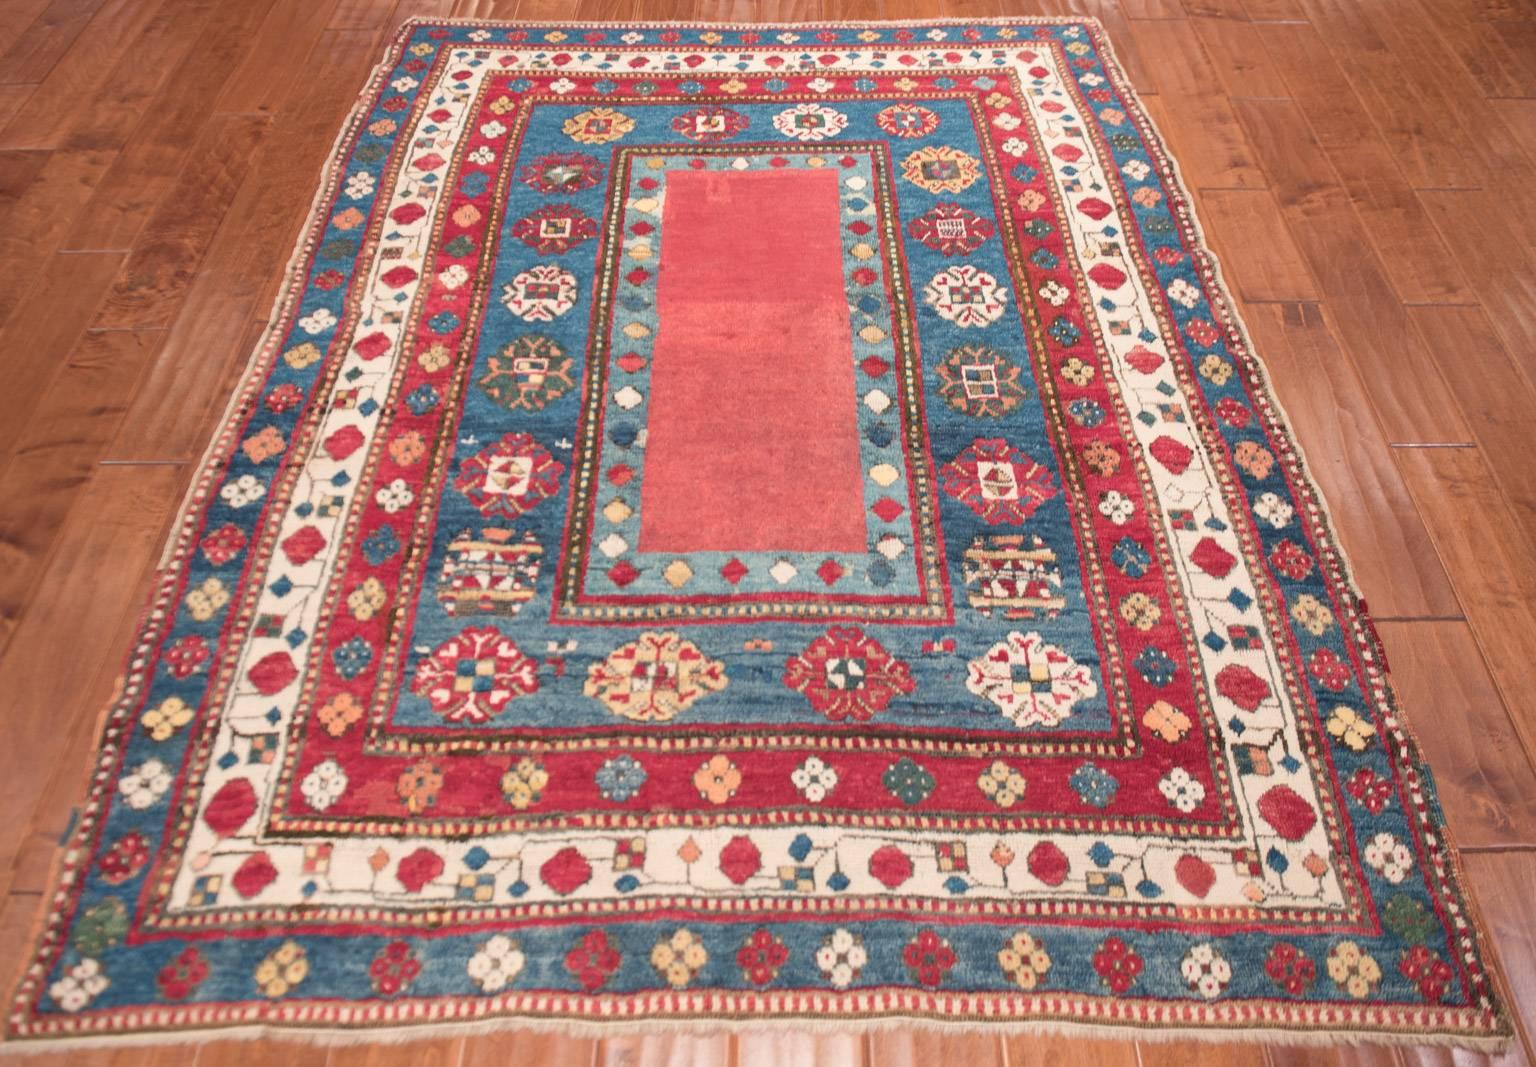 Early Kazak example of a Lambalo type. Lovely balance piece with unusual fuchshine dyed field color. All natural dyes with beautiful soft lustrous wool.
Violet red field likely produced from cochineal dye. Indigo blue in the border
Lovely